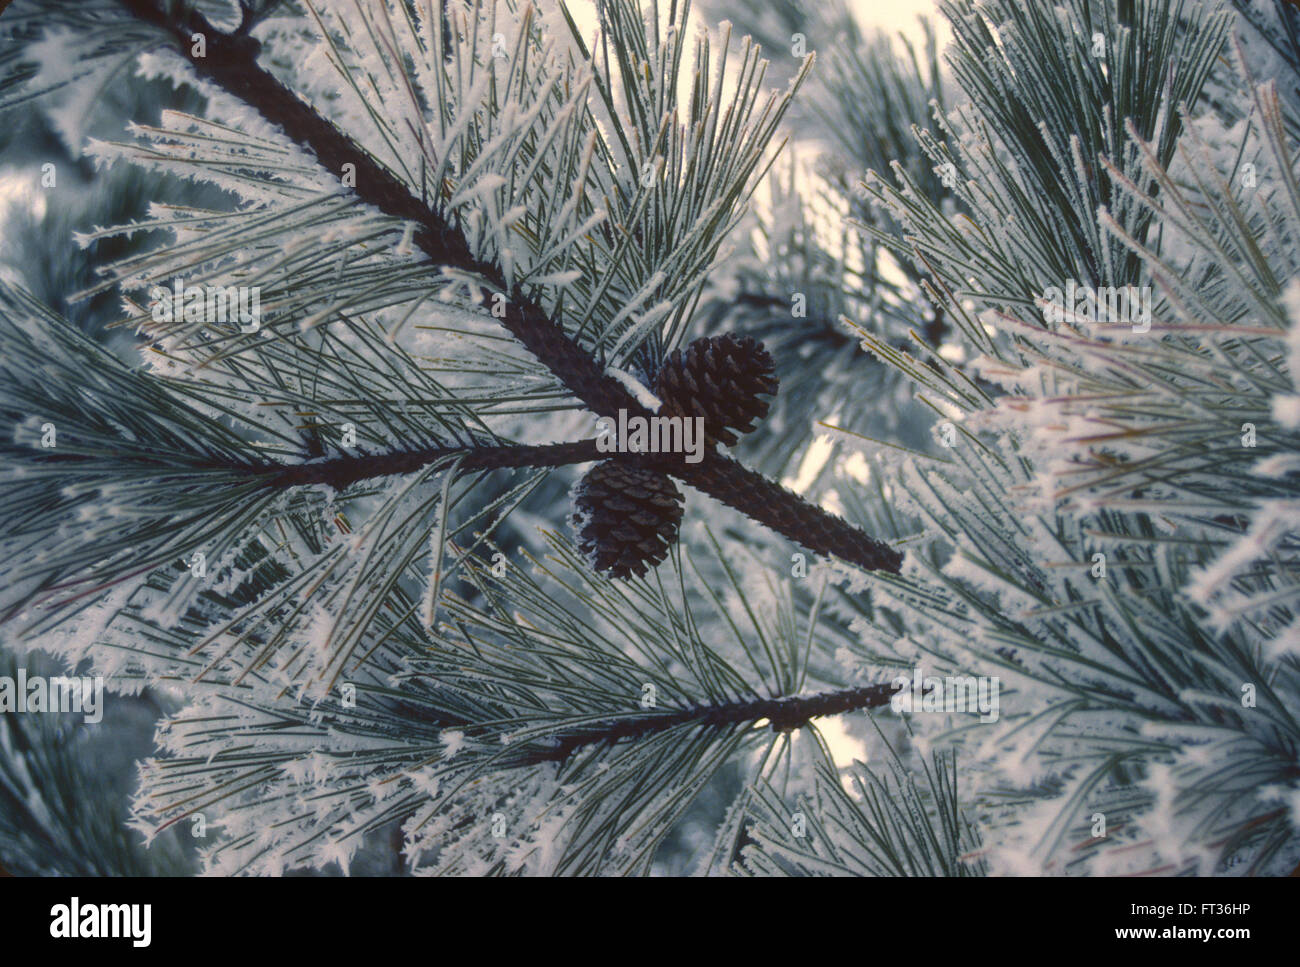 Hoar frost covers the needles of a Red PIne, (Pinus resinosa) on a cold winter morning in Minnesota, USA. Stock Photo